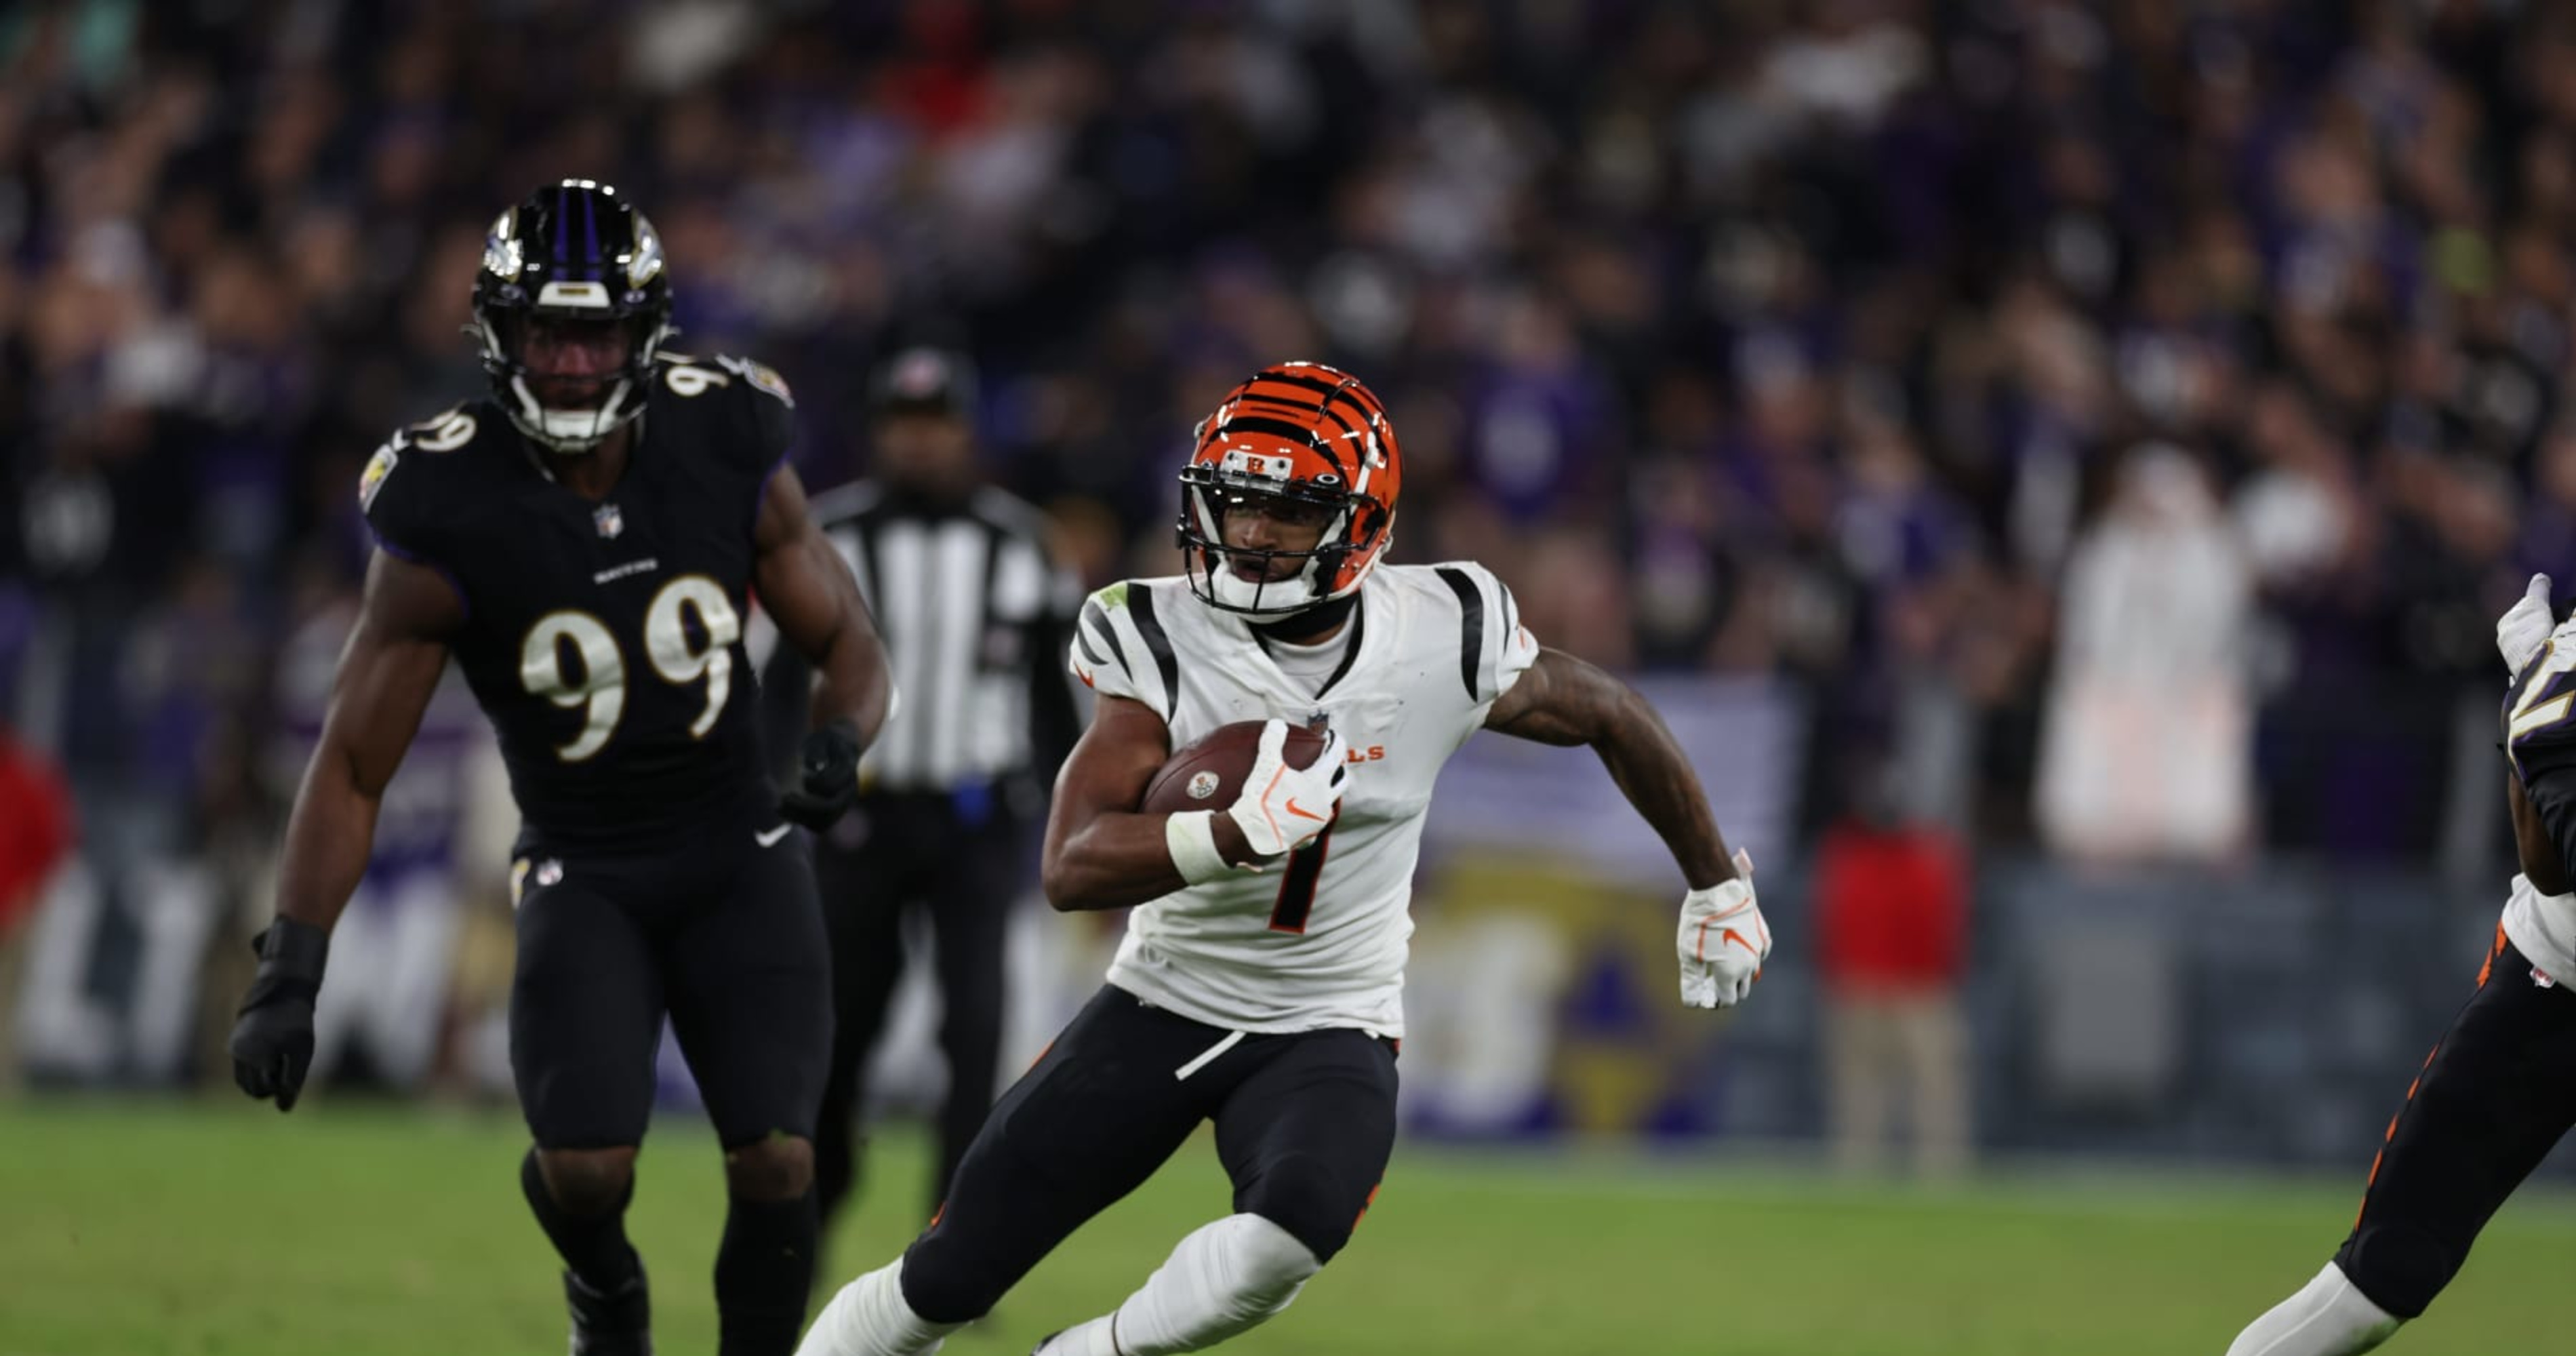 Potential Bengals vs. Ravens Wild Card Game Location Could Be Determined by Coin..